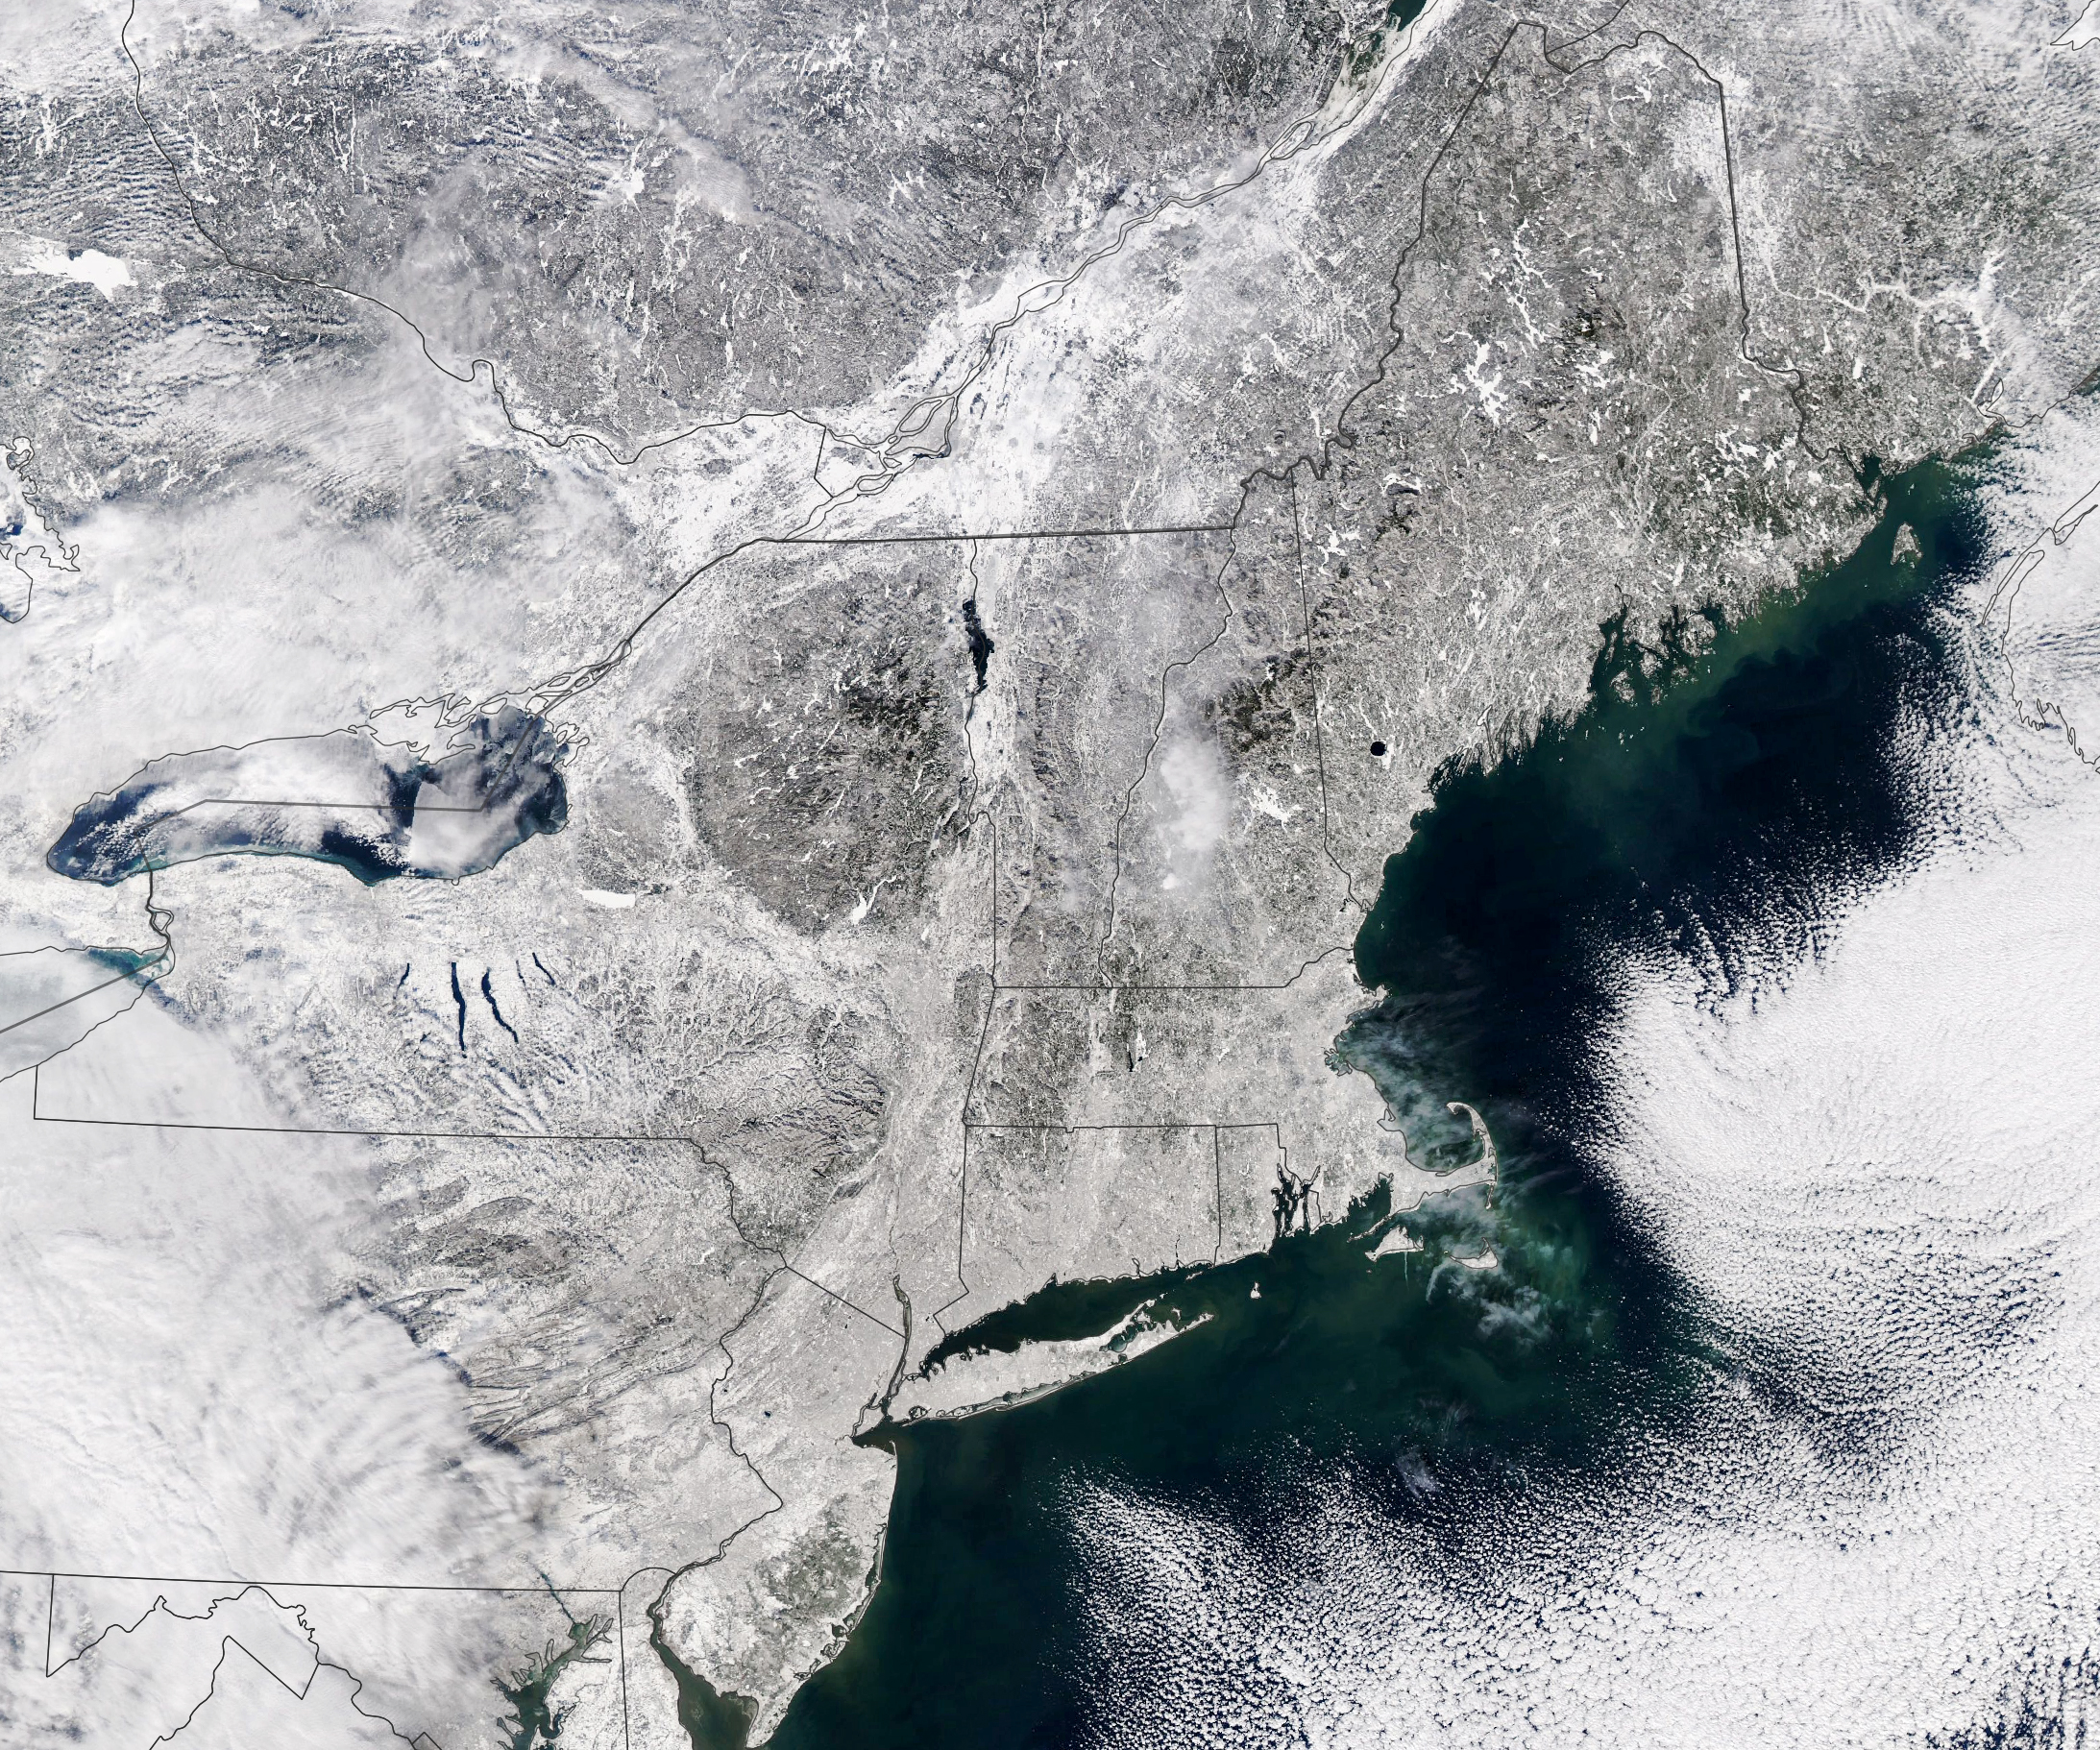 Blizzard Blankets Northeast U.S. in Snow - related image preview